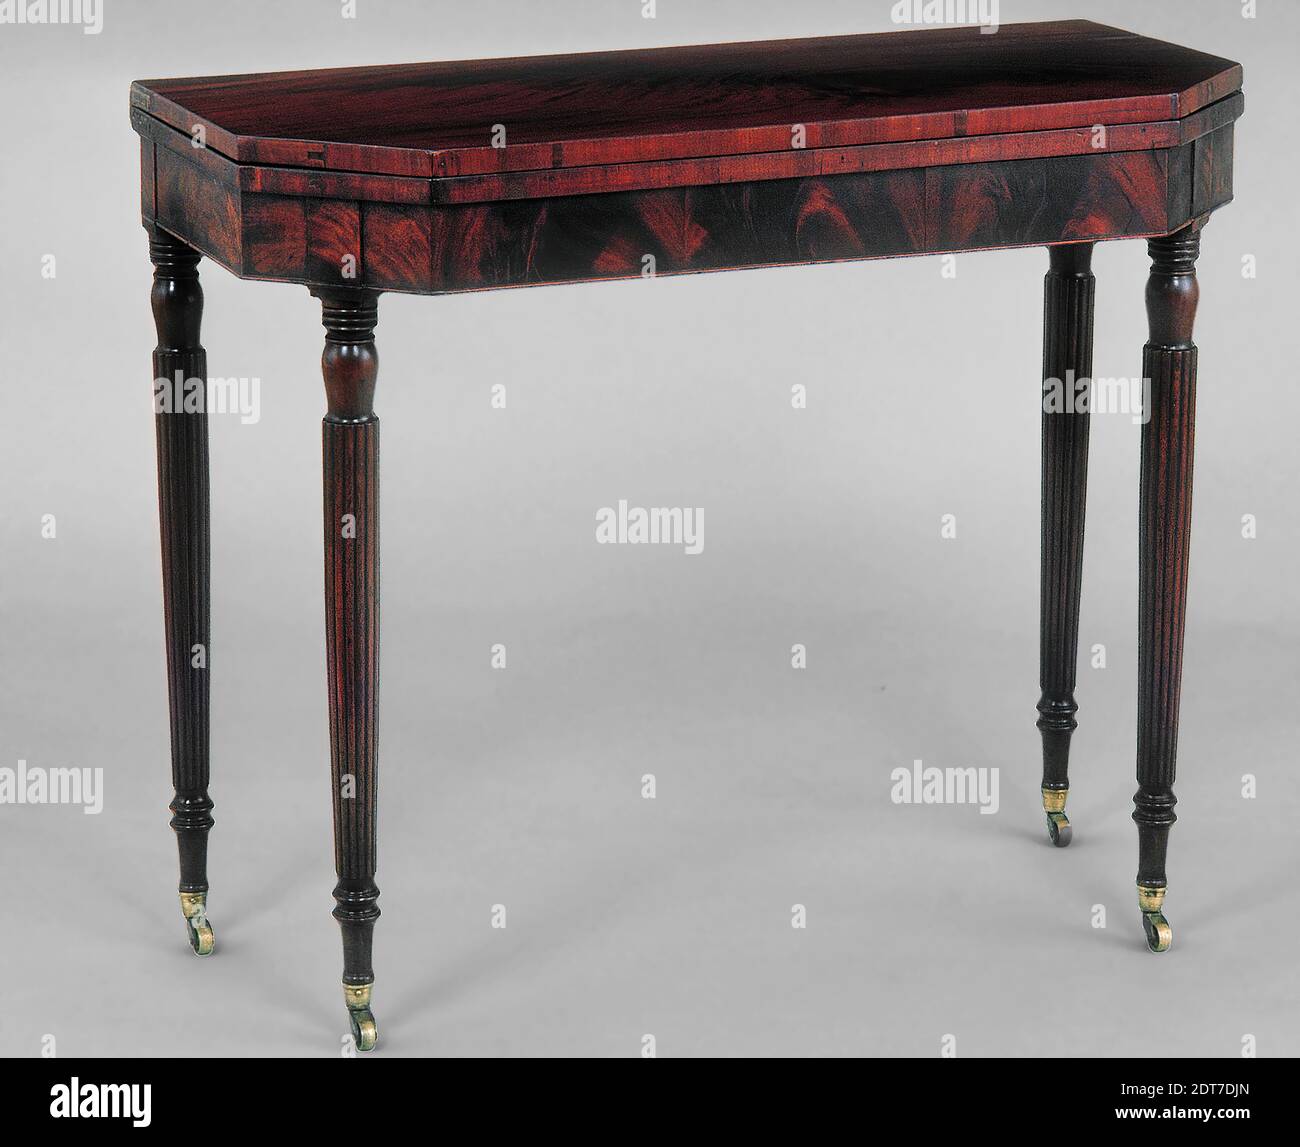 Maker, attributed to: Charles-Honore Lannuier, American, Card table, Mahogany, mahogany veneer; eastern white pine (front and side frame rails, glue blocks), black cherry (back frame rail, medial brace, stop pin), ash (pivot block), 30 1/8 × 35 1/2 × 17 13/16 in. (76.5 × 90.2 × 45.3 cm), Made in New York, New York, American, 19th century, Furniture Stock Photo